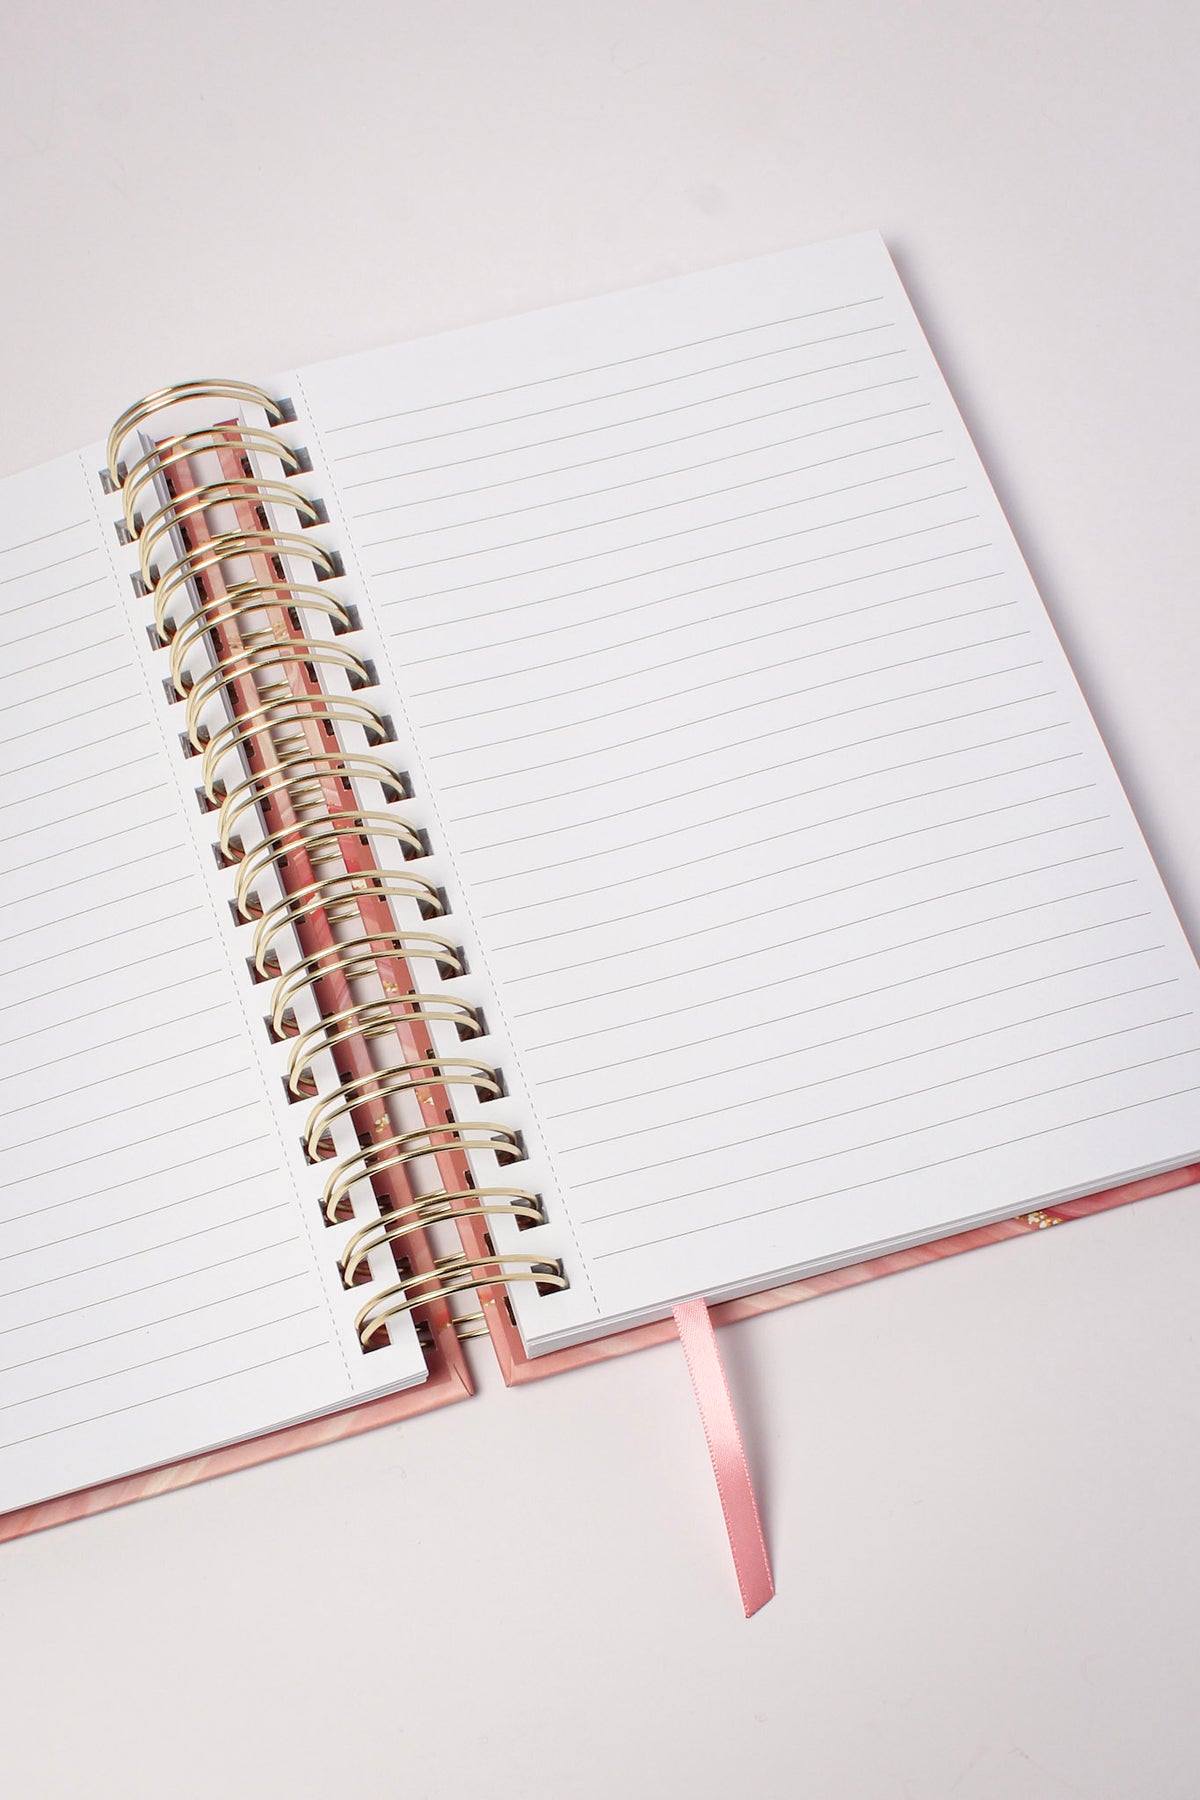 Spiral Notebook Journal - It's Already Yours